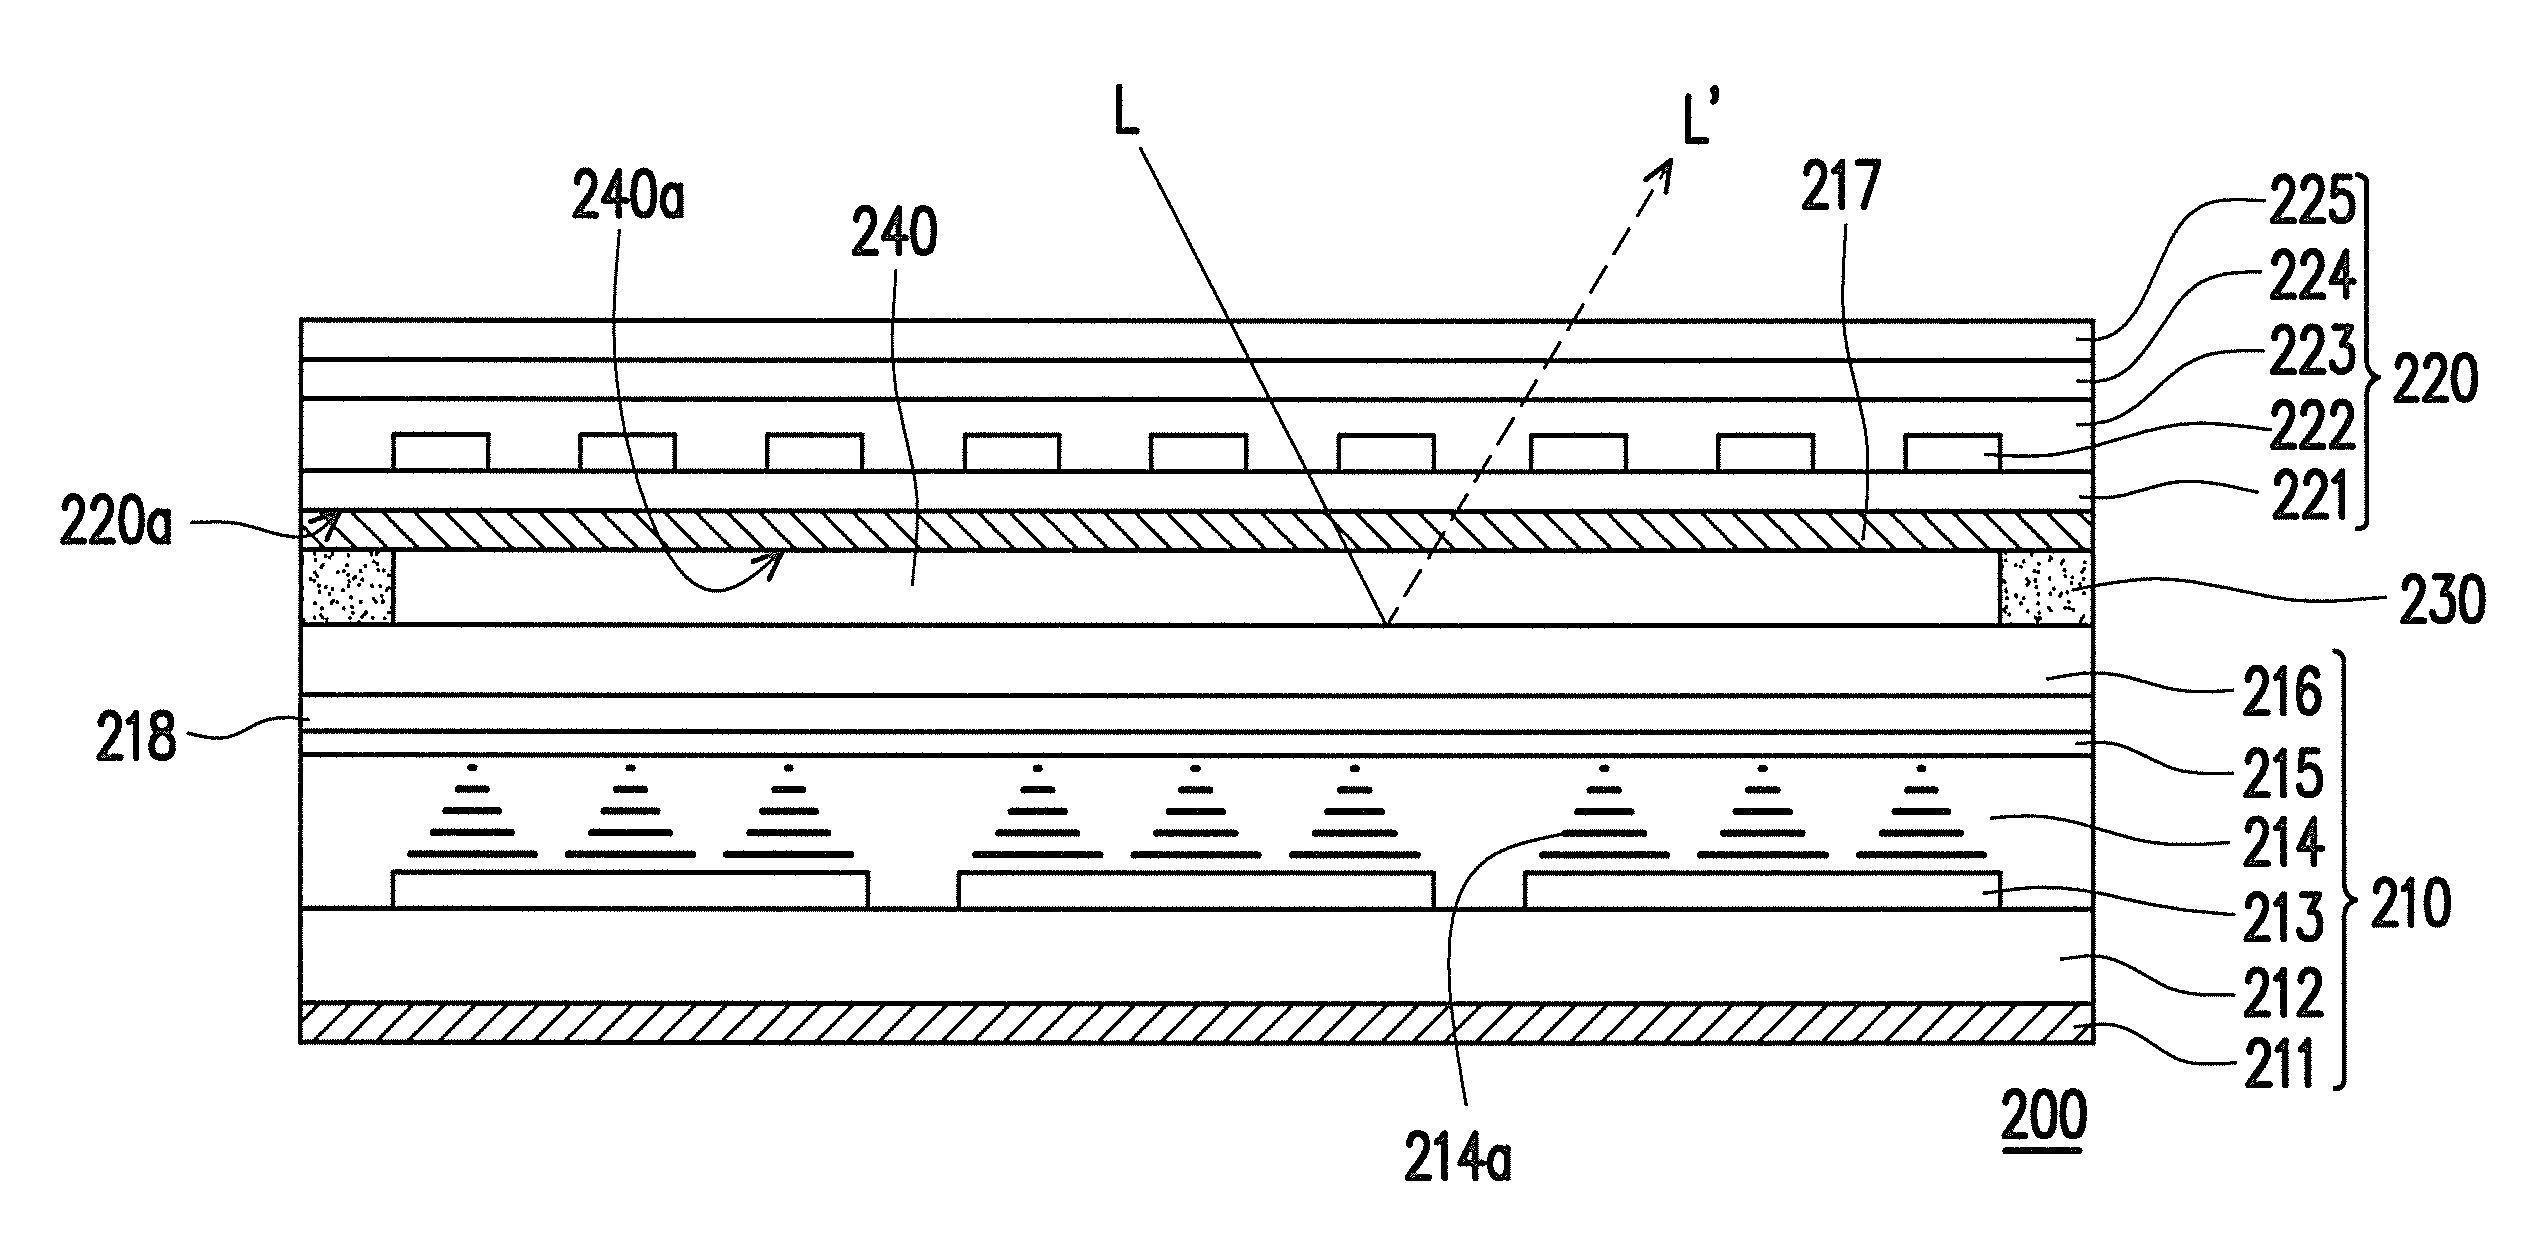 Touch display, liquid crystal display with a built-in touch panel